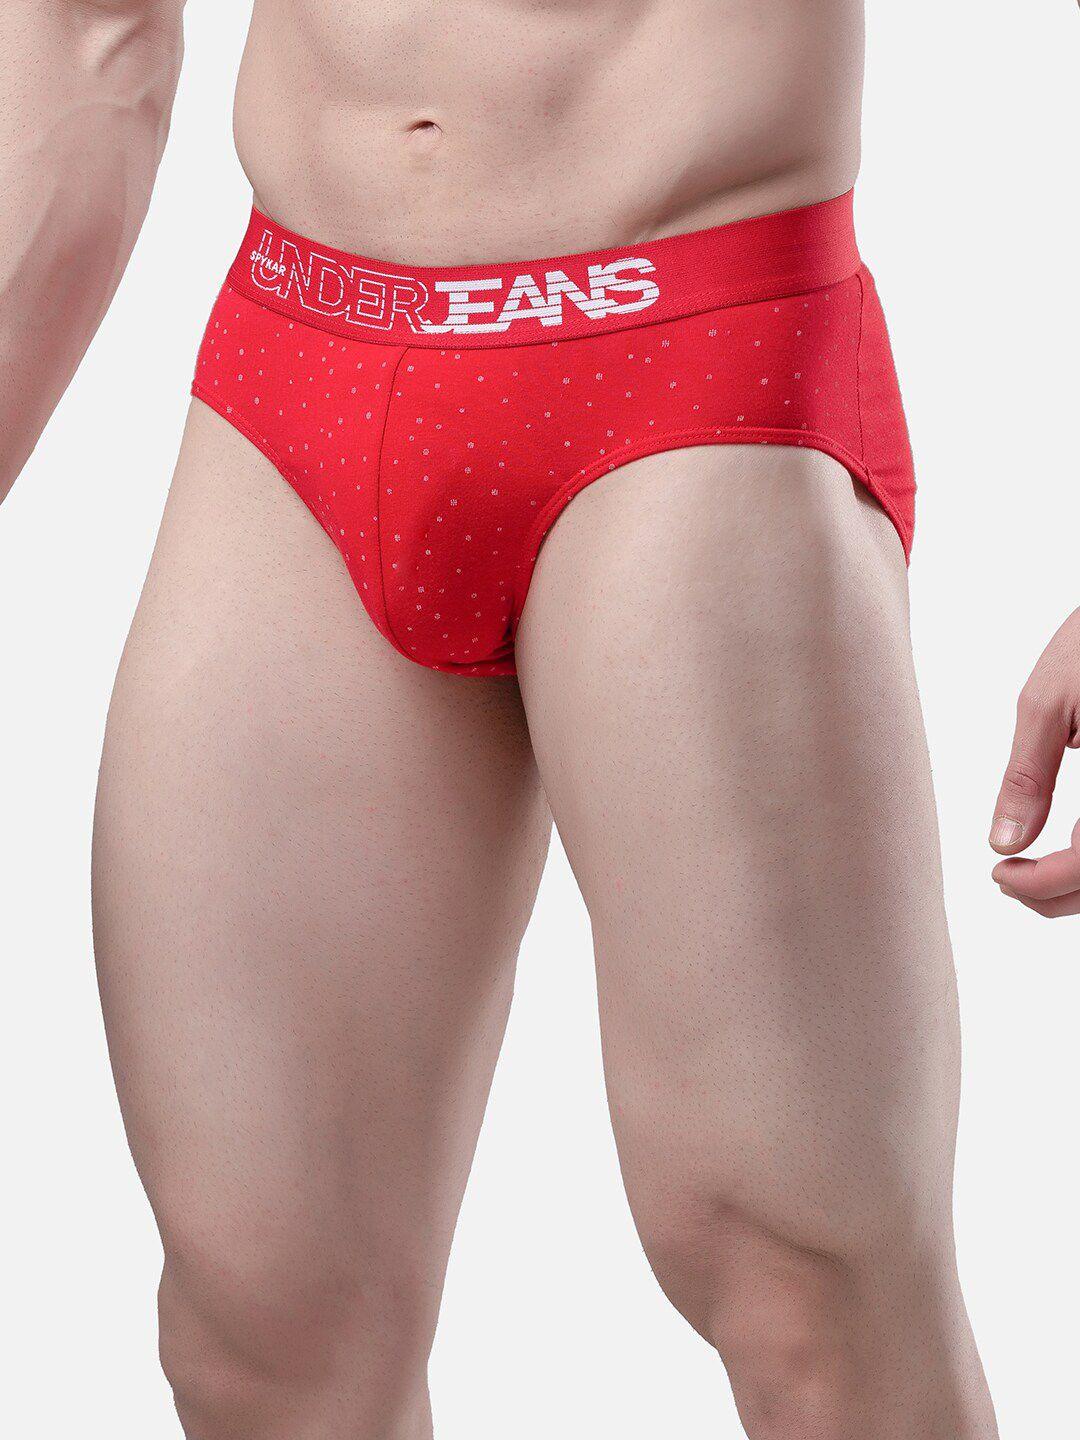 underjeans by spykar men red & white printed cotton basic briefs ujmbrpbs033red